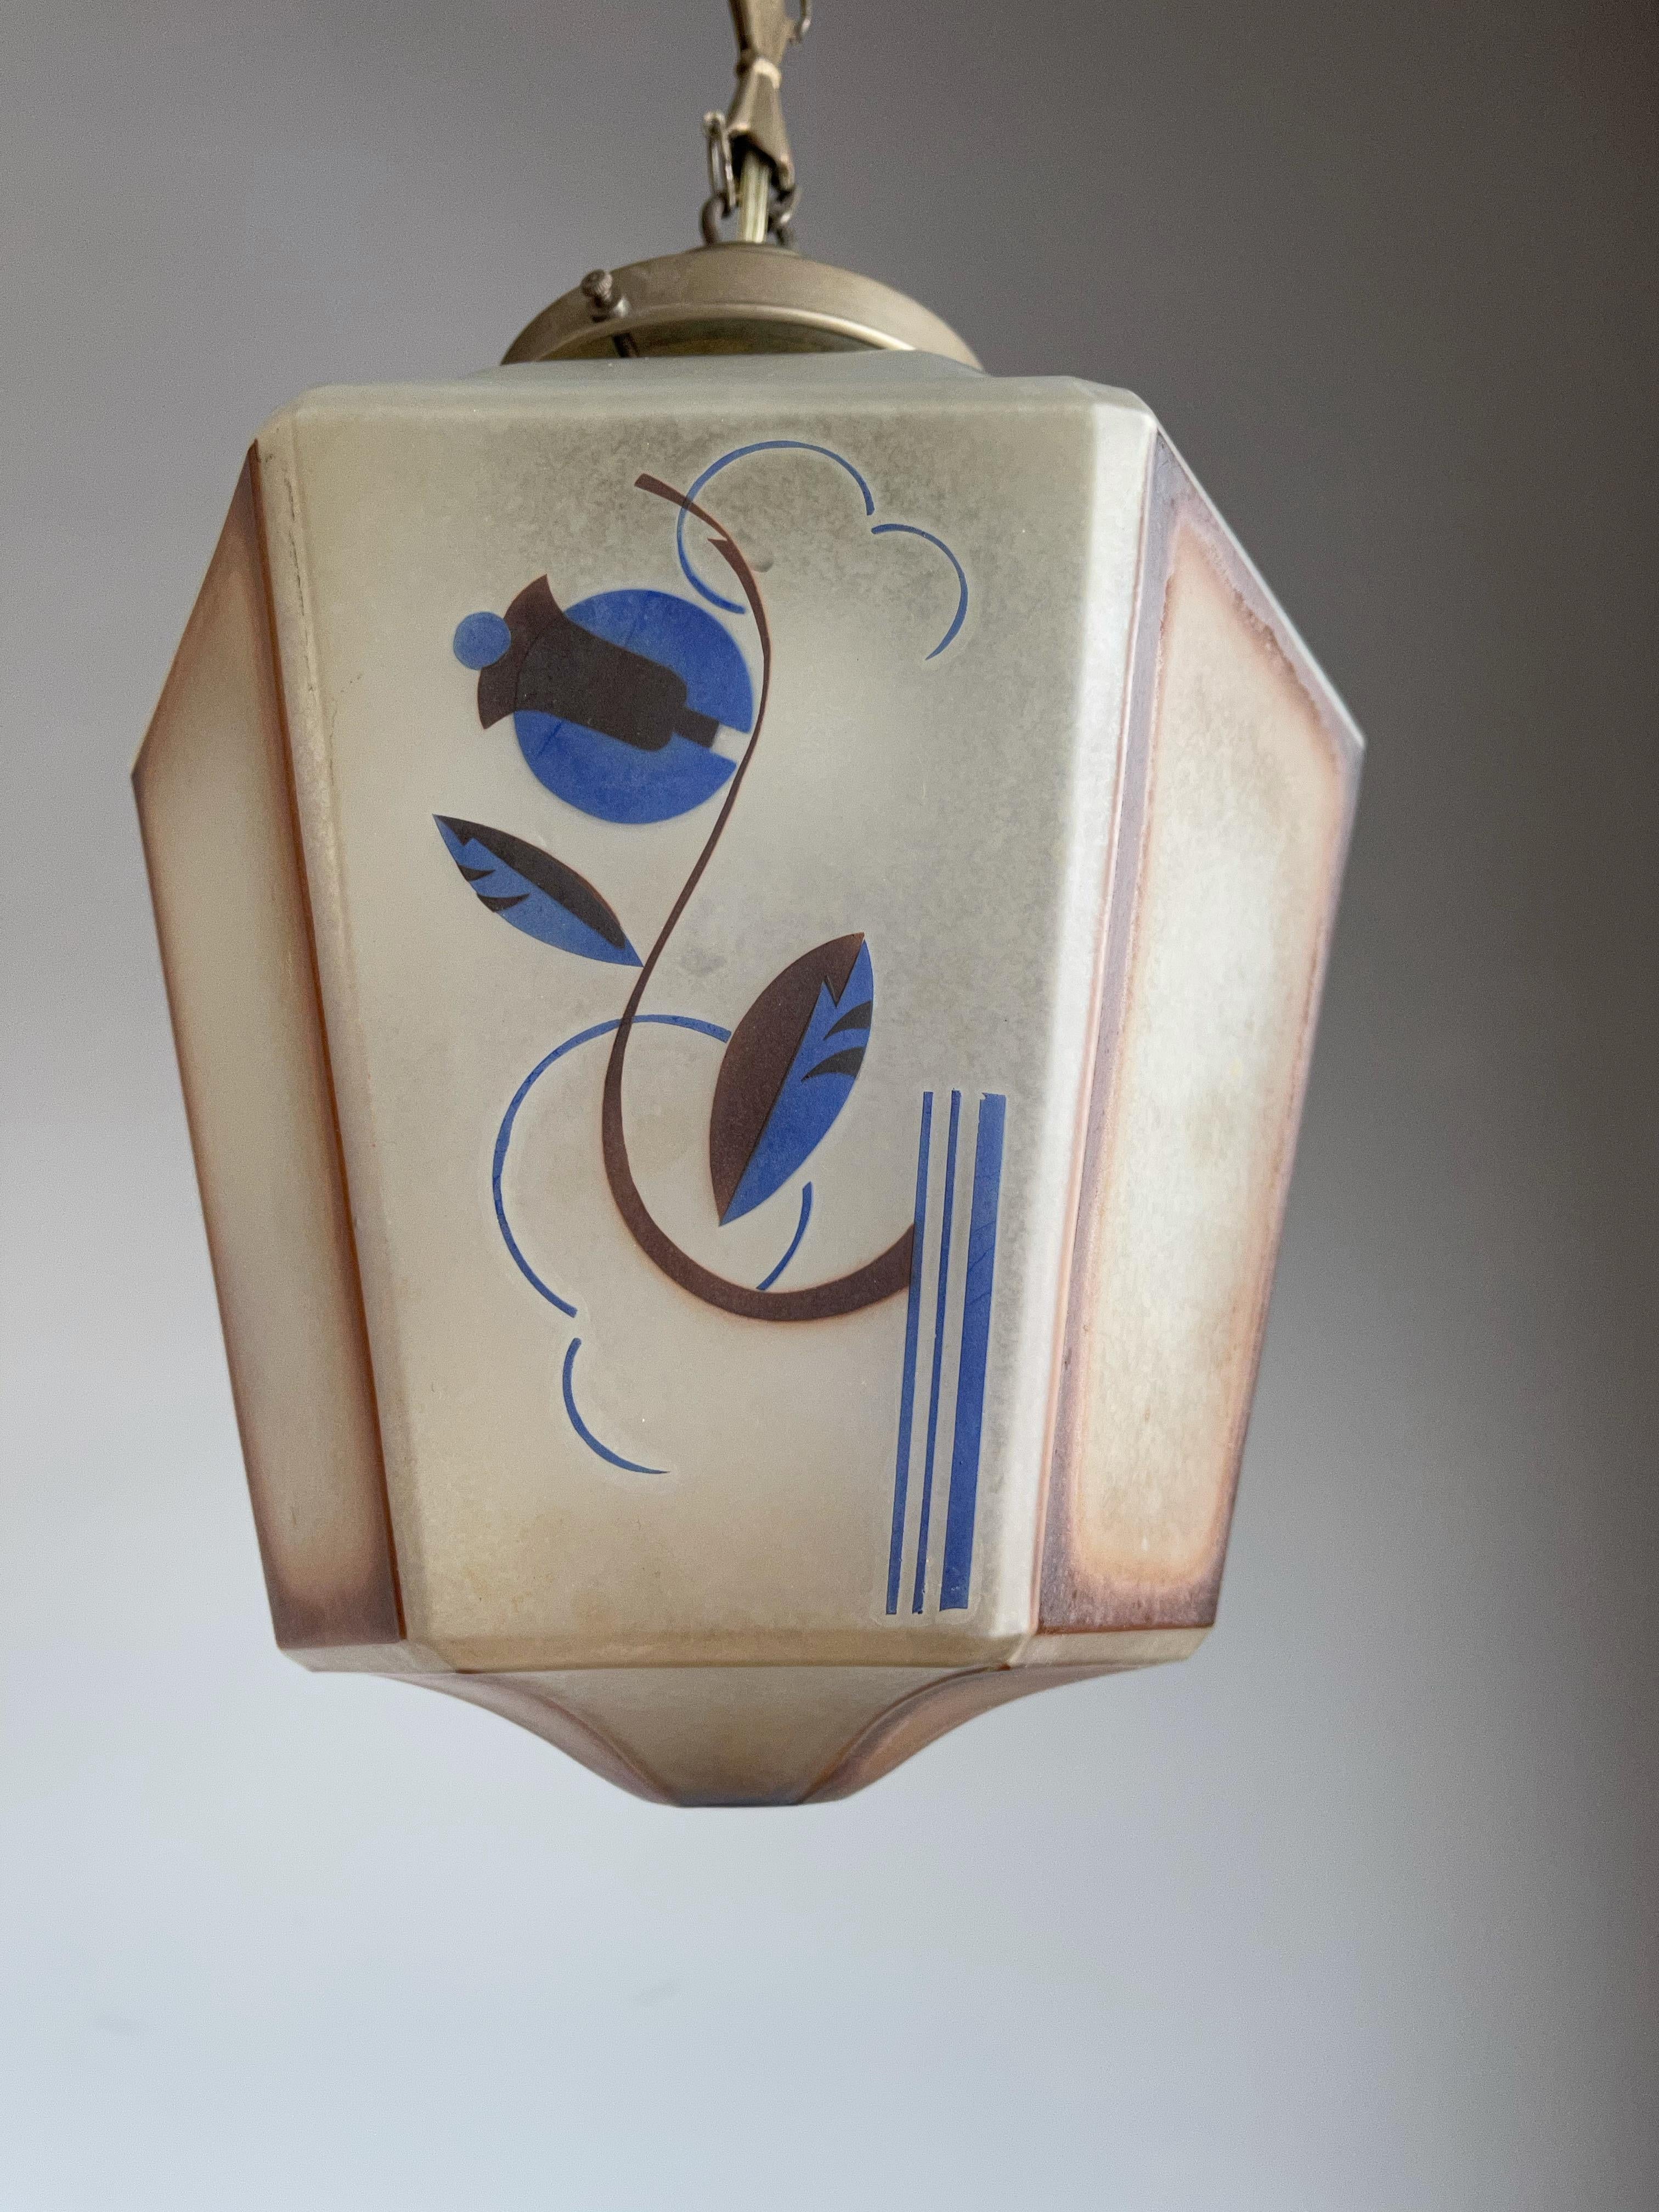 Handcrafted and stylish Art Deco lantern or ceiling lamp for your stairwell, hallway or bedroom.

This all handcrafted, practical size and beautiful looking ceiling lamp is another one of our recent great finds. The beautiful overall design is what